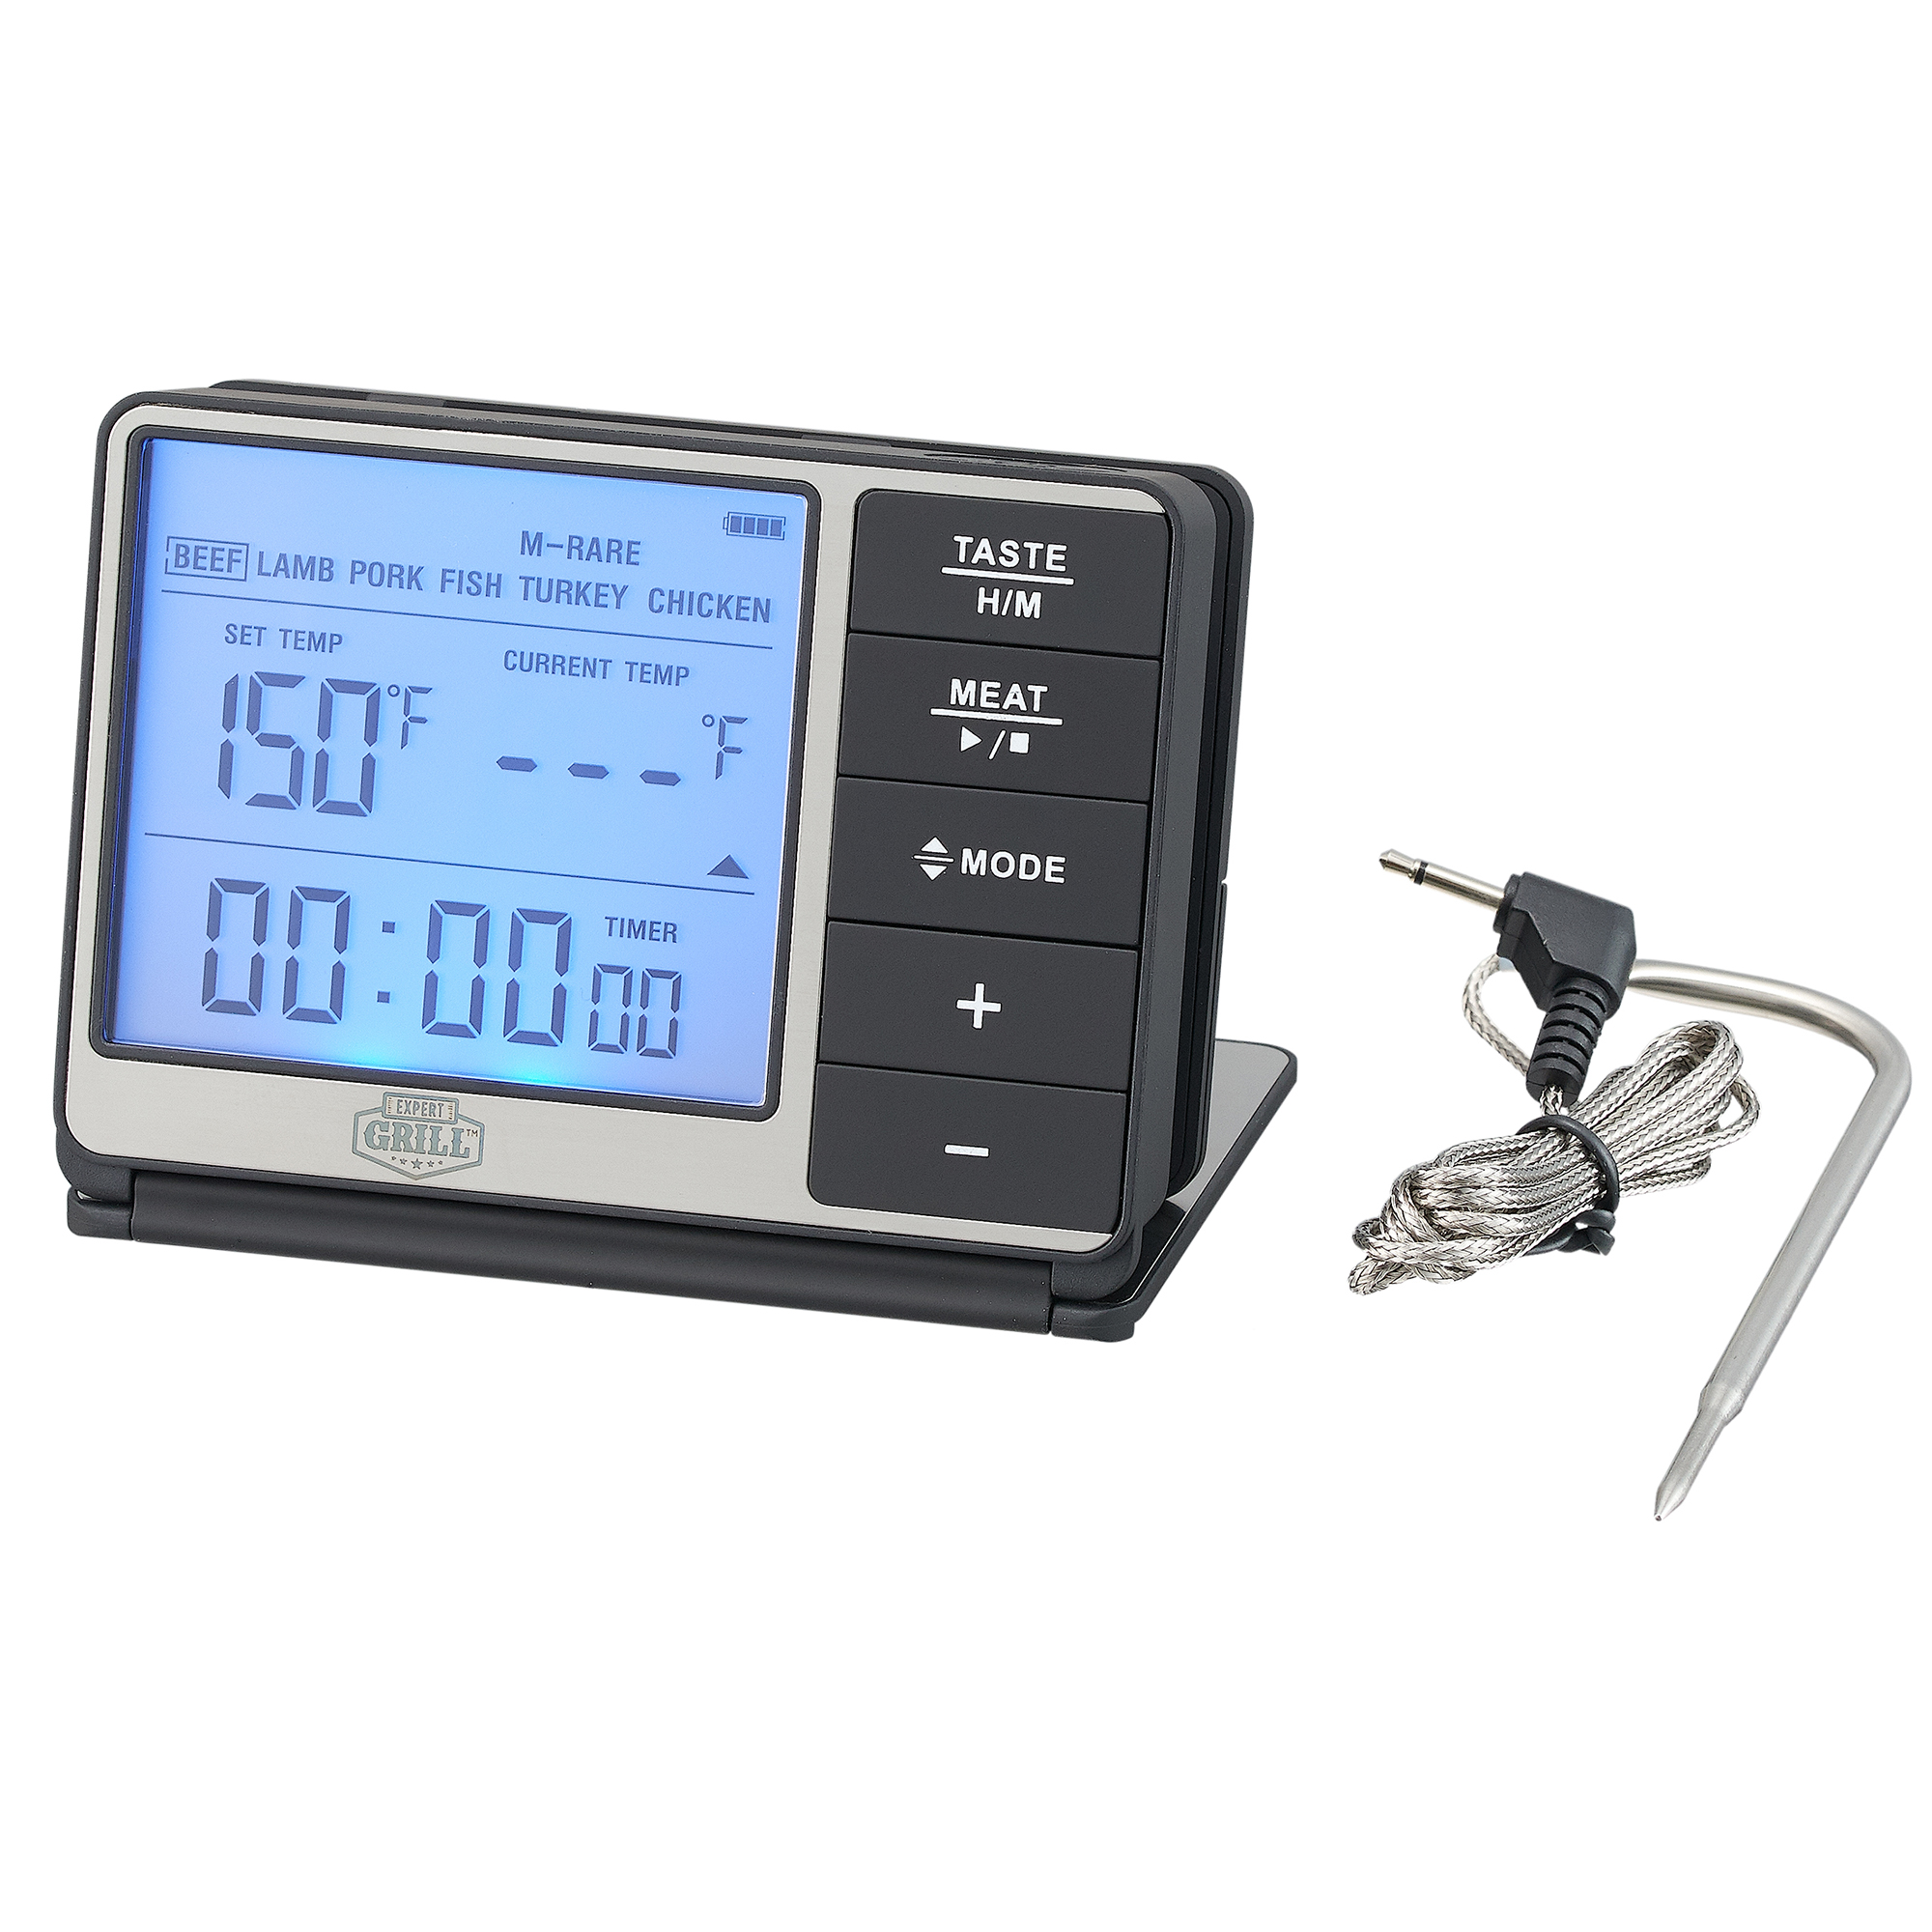 Expert Grill ABS Deluxe Digital BBQ Grilling Meat Thermometer - image 1 of 11